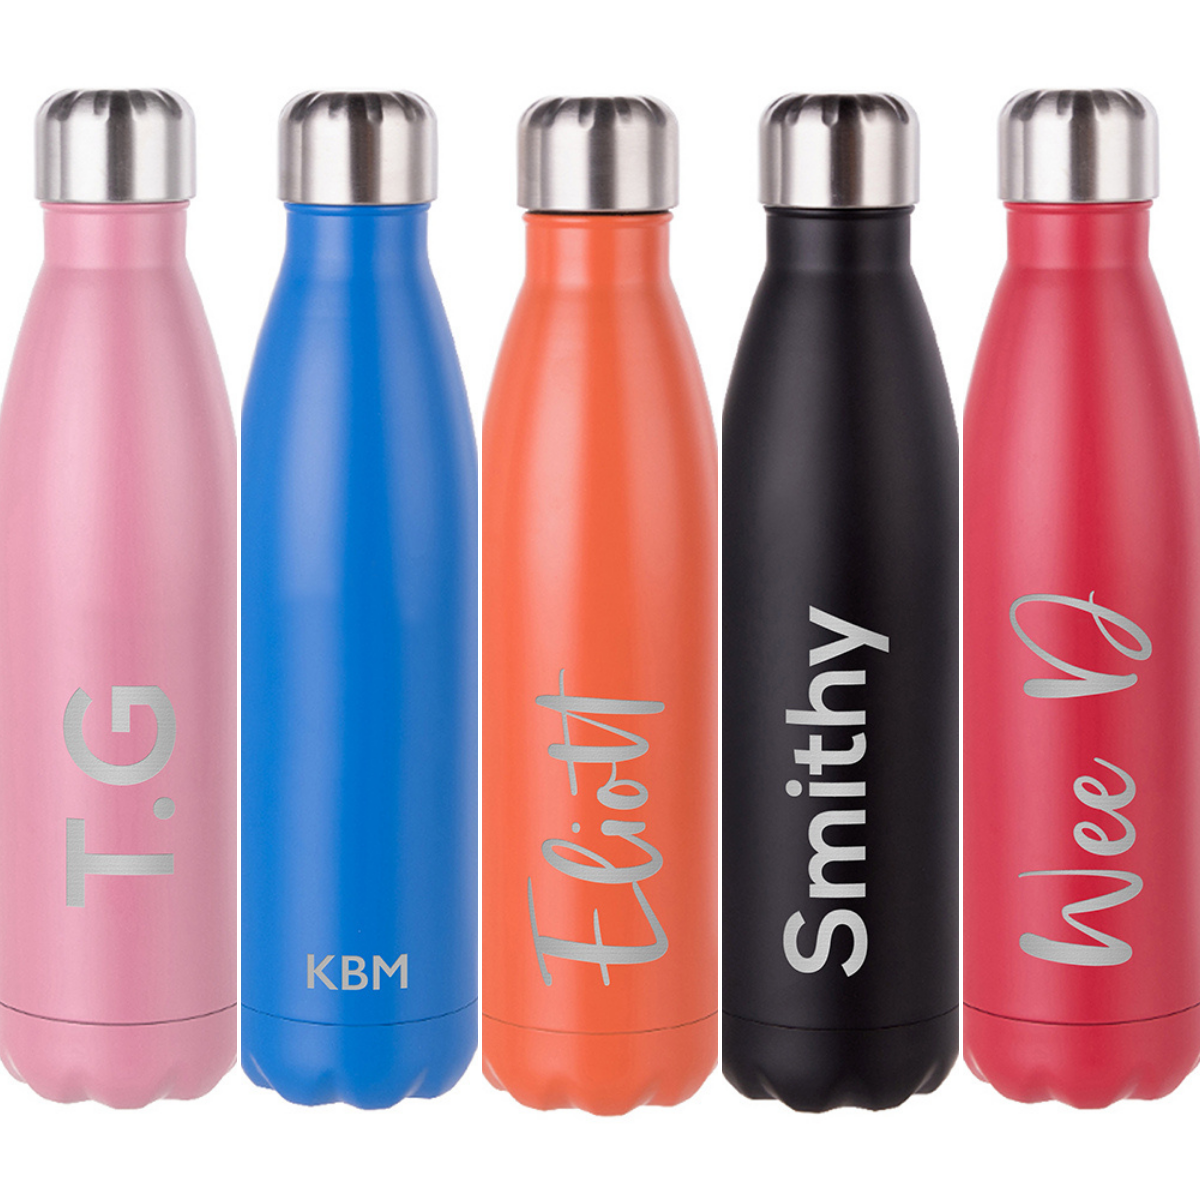 Insulated Water Bottle Available in 5 Colours with Matt Finish